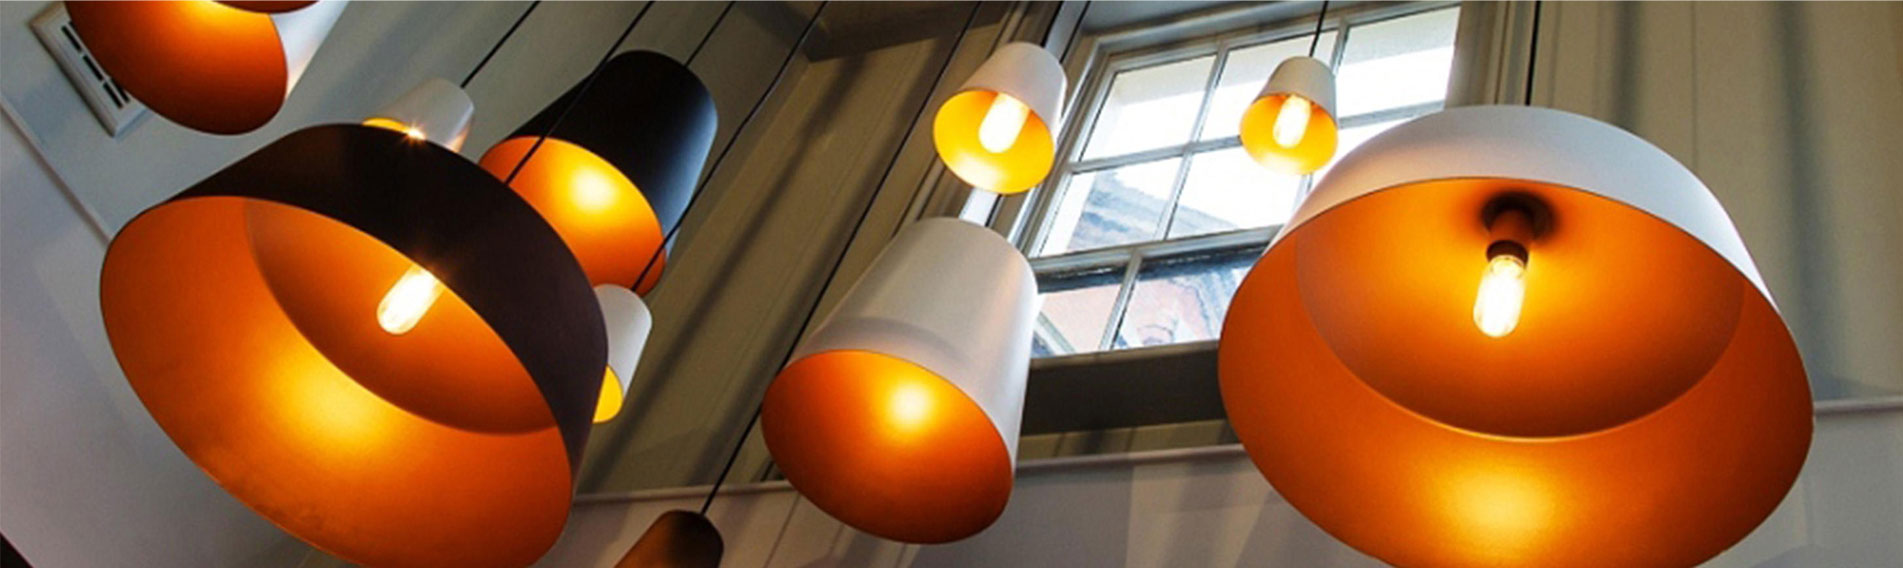 Top 6 Pendant Light Ideas to Steal the Show Banner